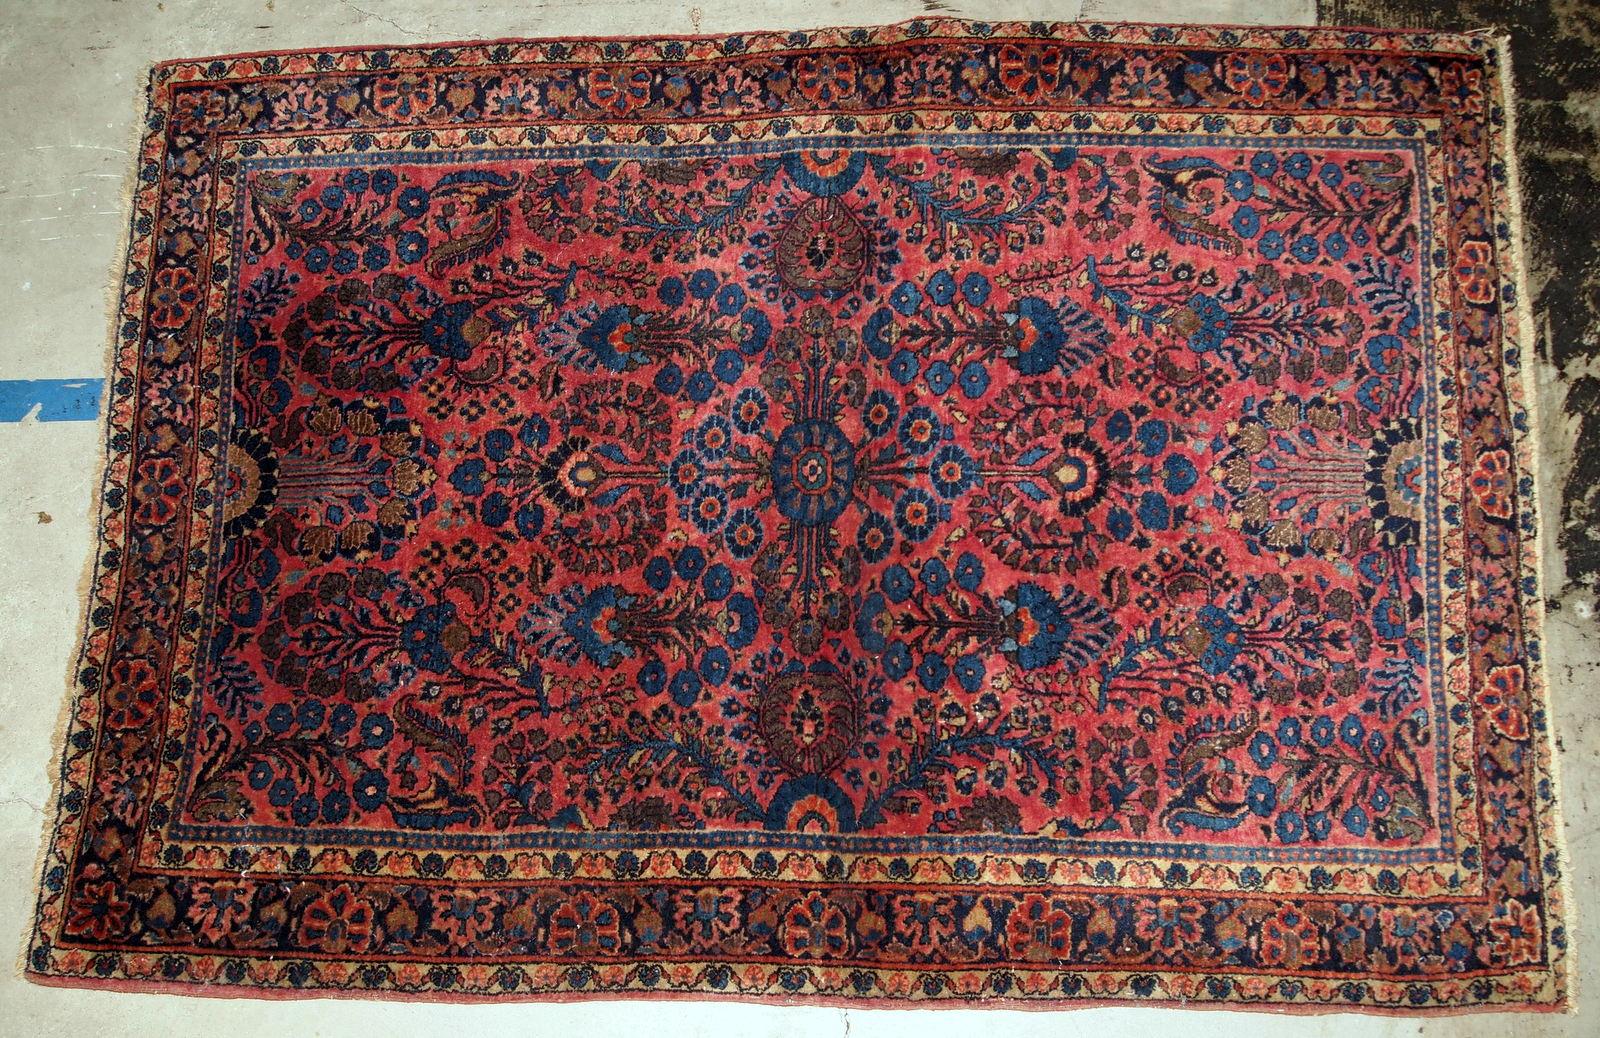 Handmade antique Sarouk rug in bright red and blue shades. The rug is in original good condition from the beginning of 20th century.

?-condition: original good,

-circa: 1910s,

-size: 3.1' x 5.5' (94cm x 167cm),

-material: